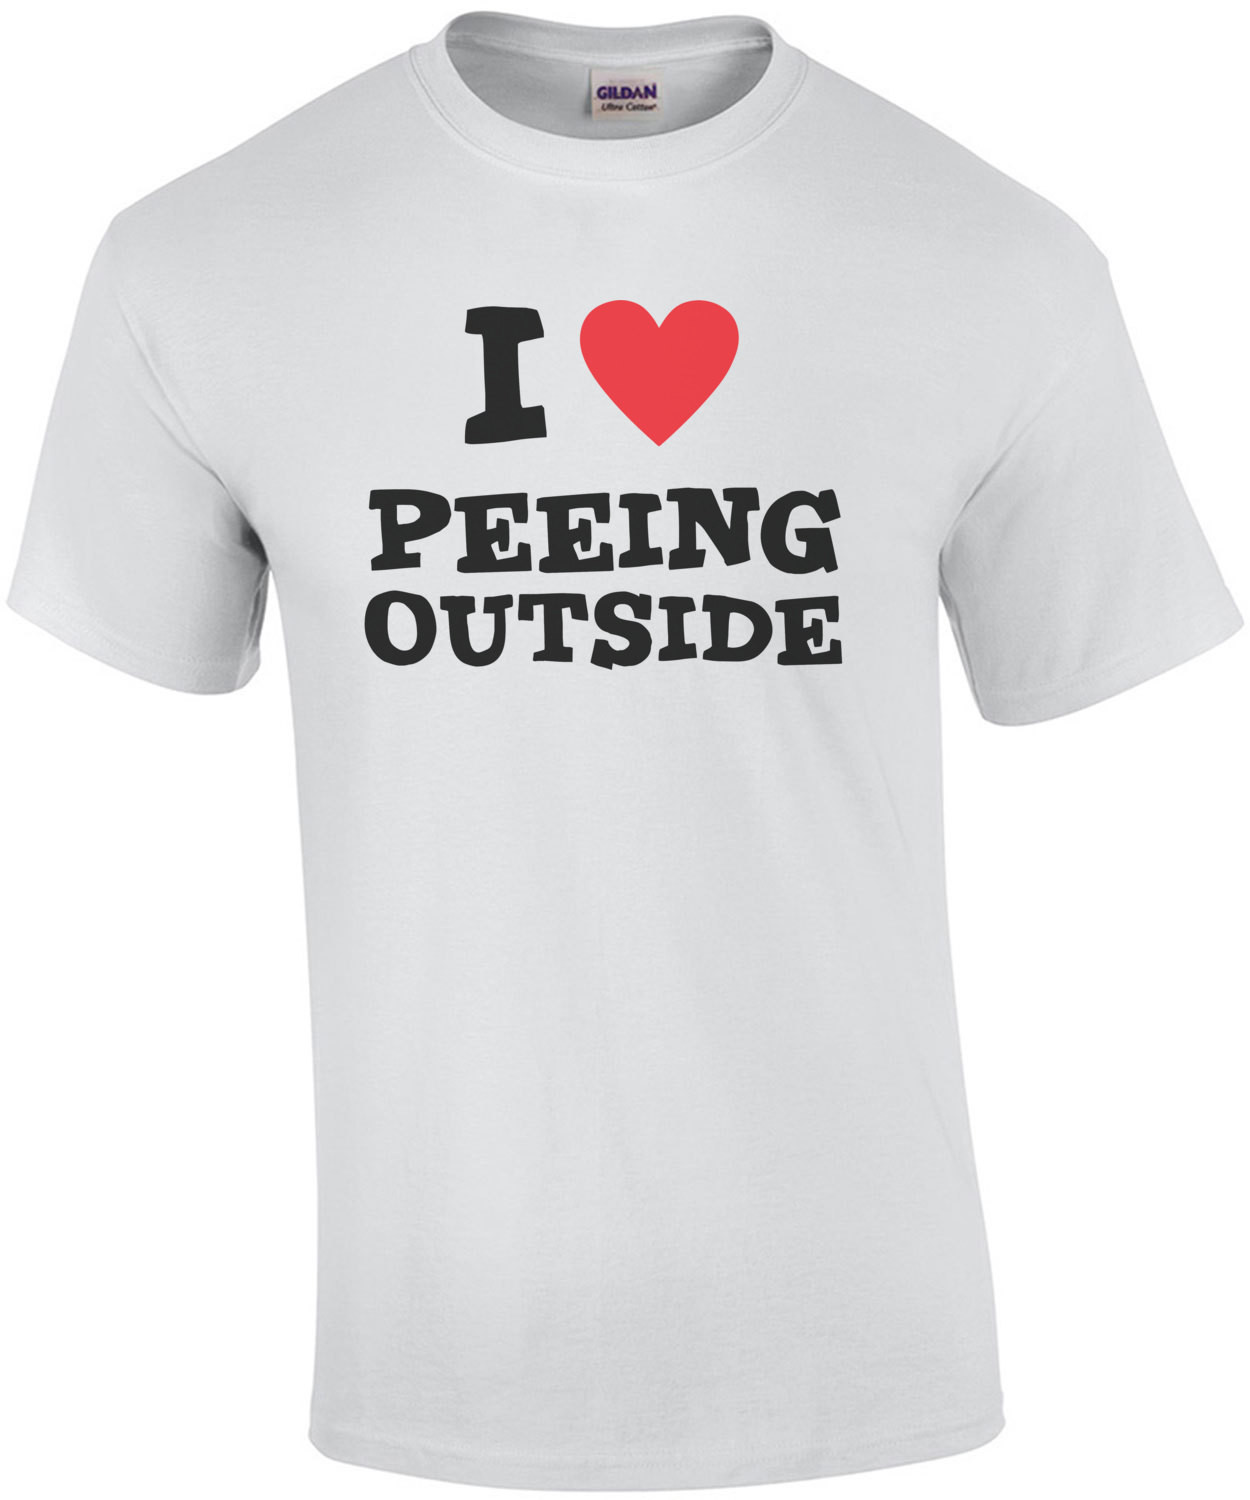 I Love Peeing Outside - Funny T-Shirt